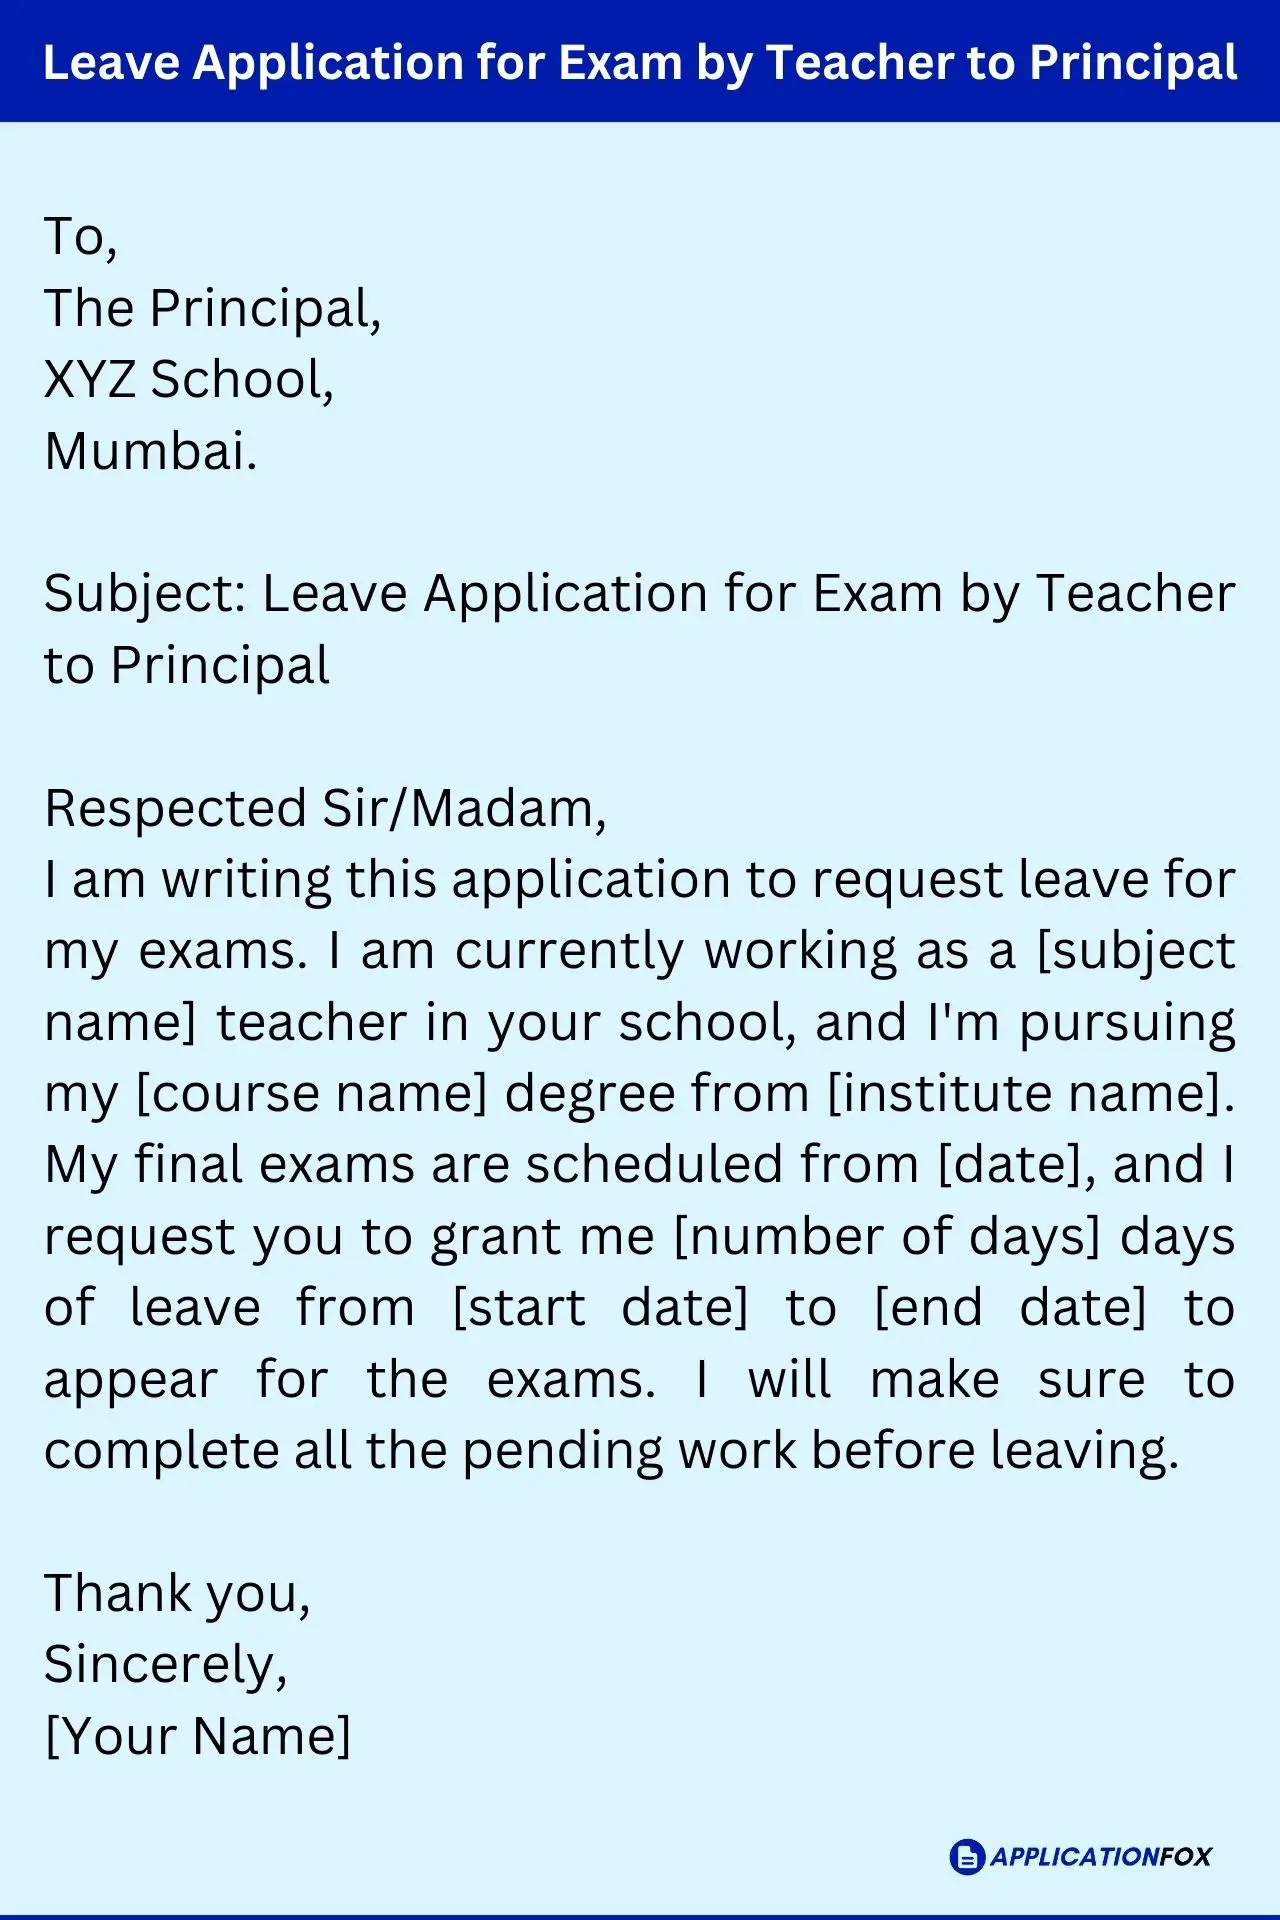 Leave Application for Exam by Teacher to Principal